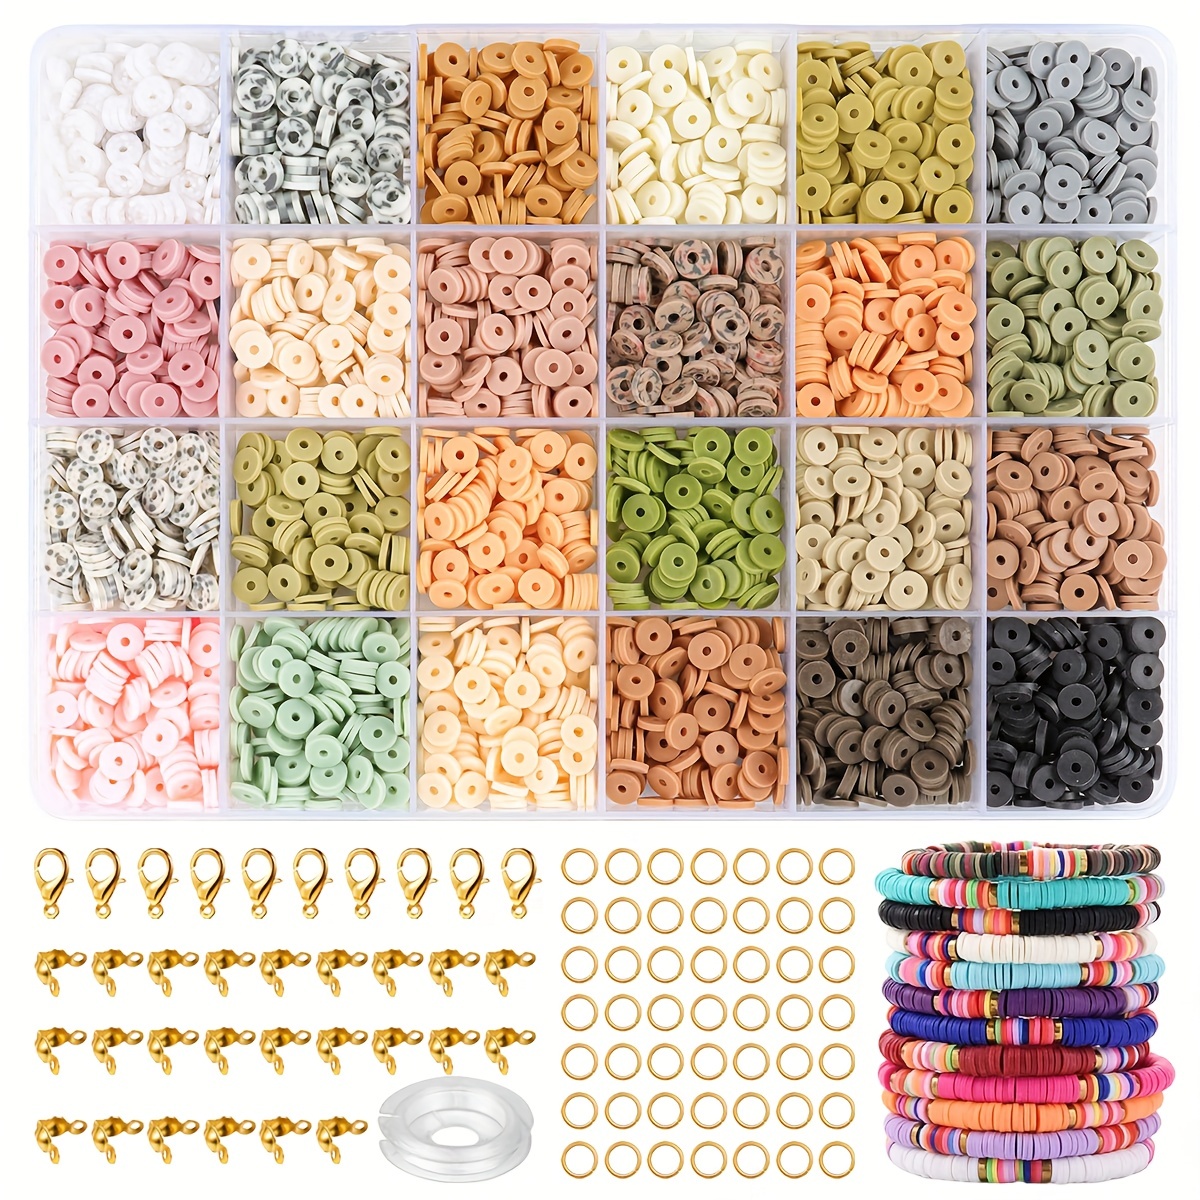 Jewelry Making Bead Kits for Girls Over 10000 PCS Bracelet Making Kit Beads  for Kids Includes Clay Beads, Plastic Beads, Scissors, Strings and  Accessories with 3-Layer Storage Box Gift Crafts : Buy